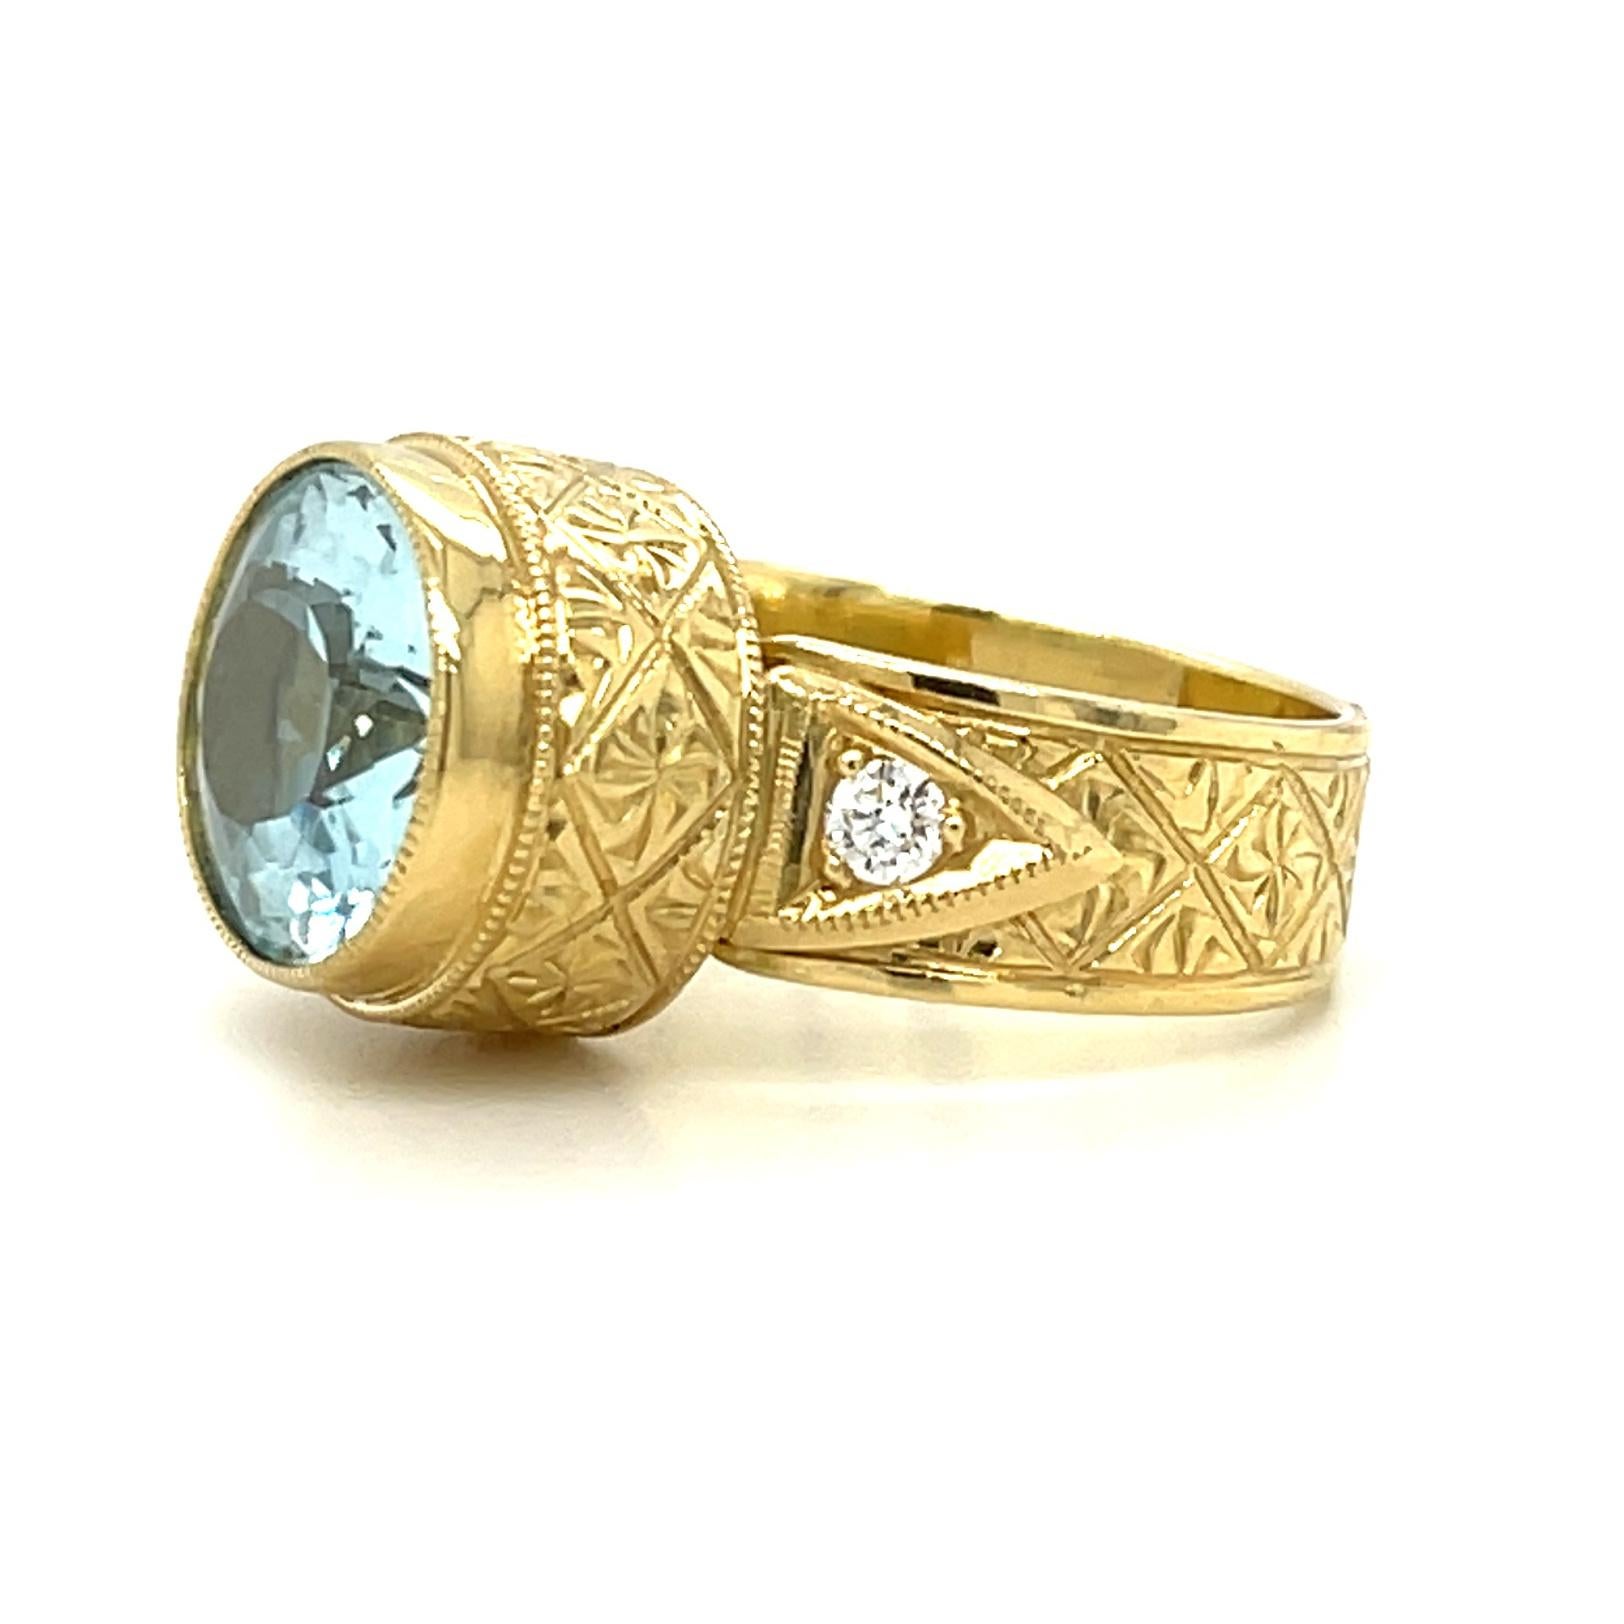 Aquamarine and Diamond Band Ring in 18k Yellow Gold, 5.17 Carats In New Condition For Sale In Los Angeles, CA